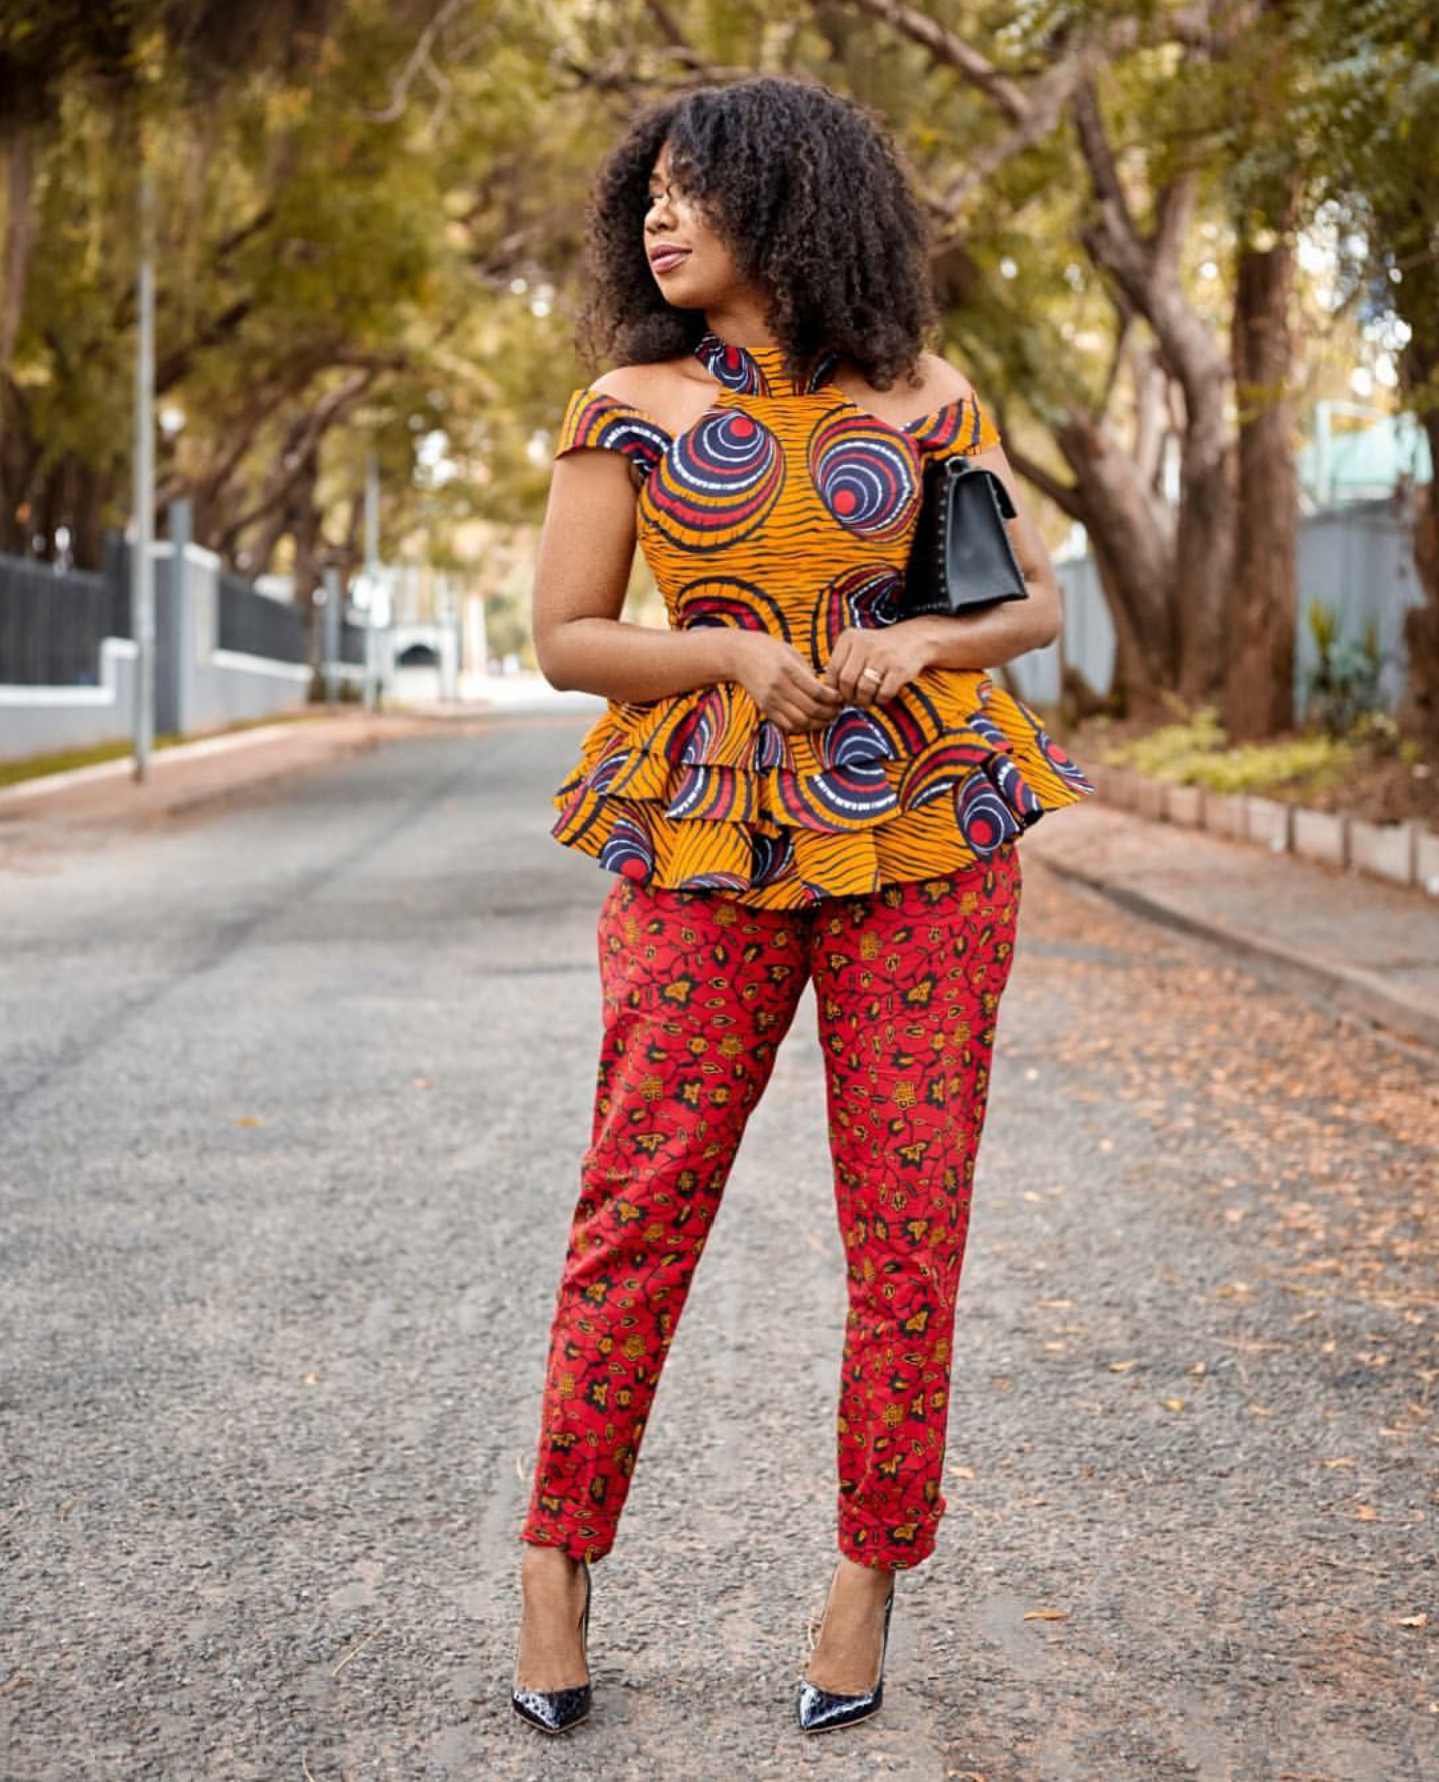 Selly Galley effortlessly slaying and serving African style goals in African prints